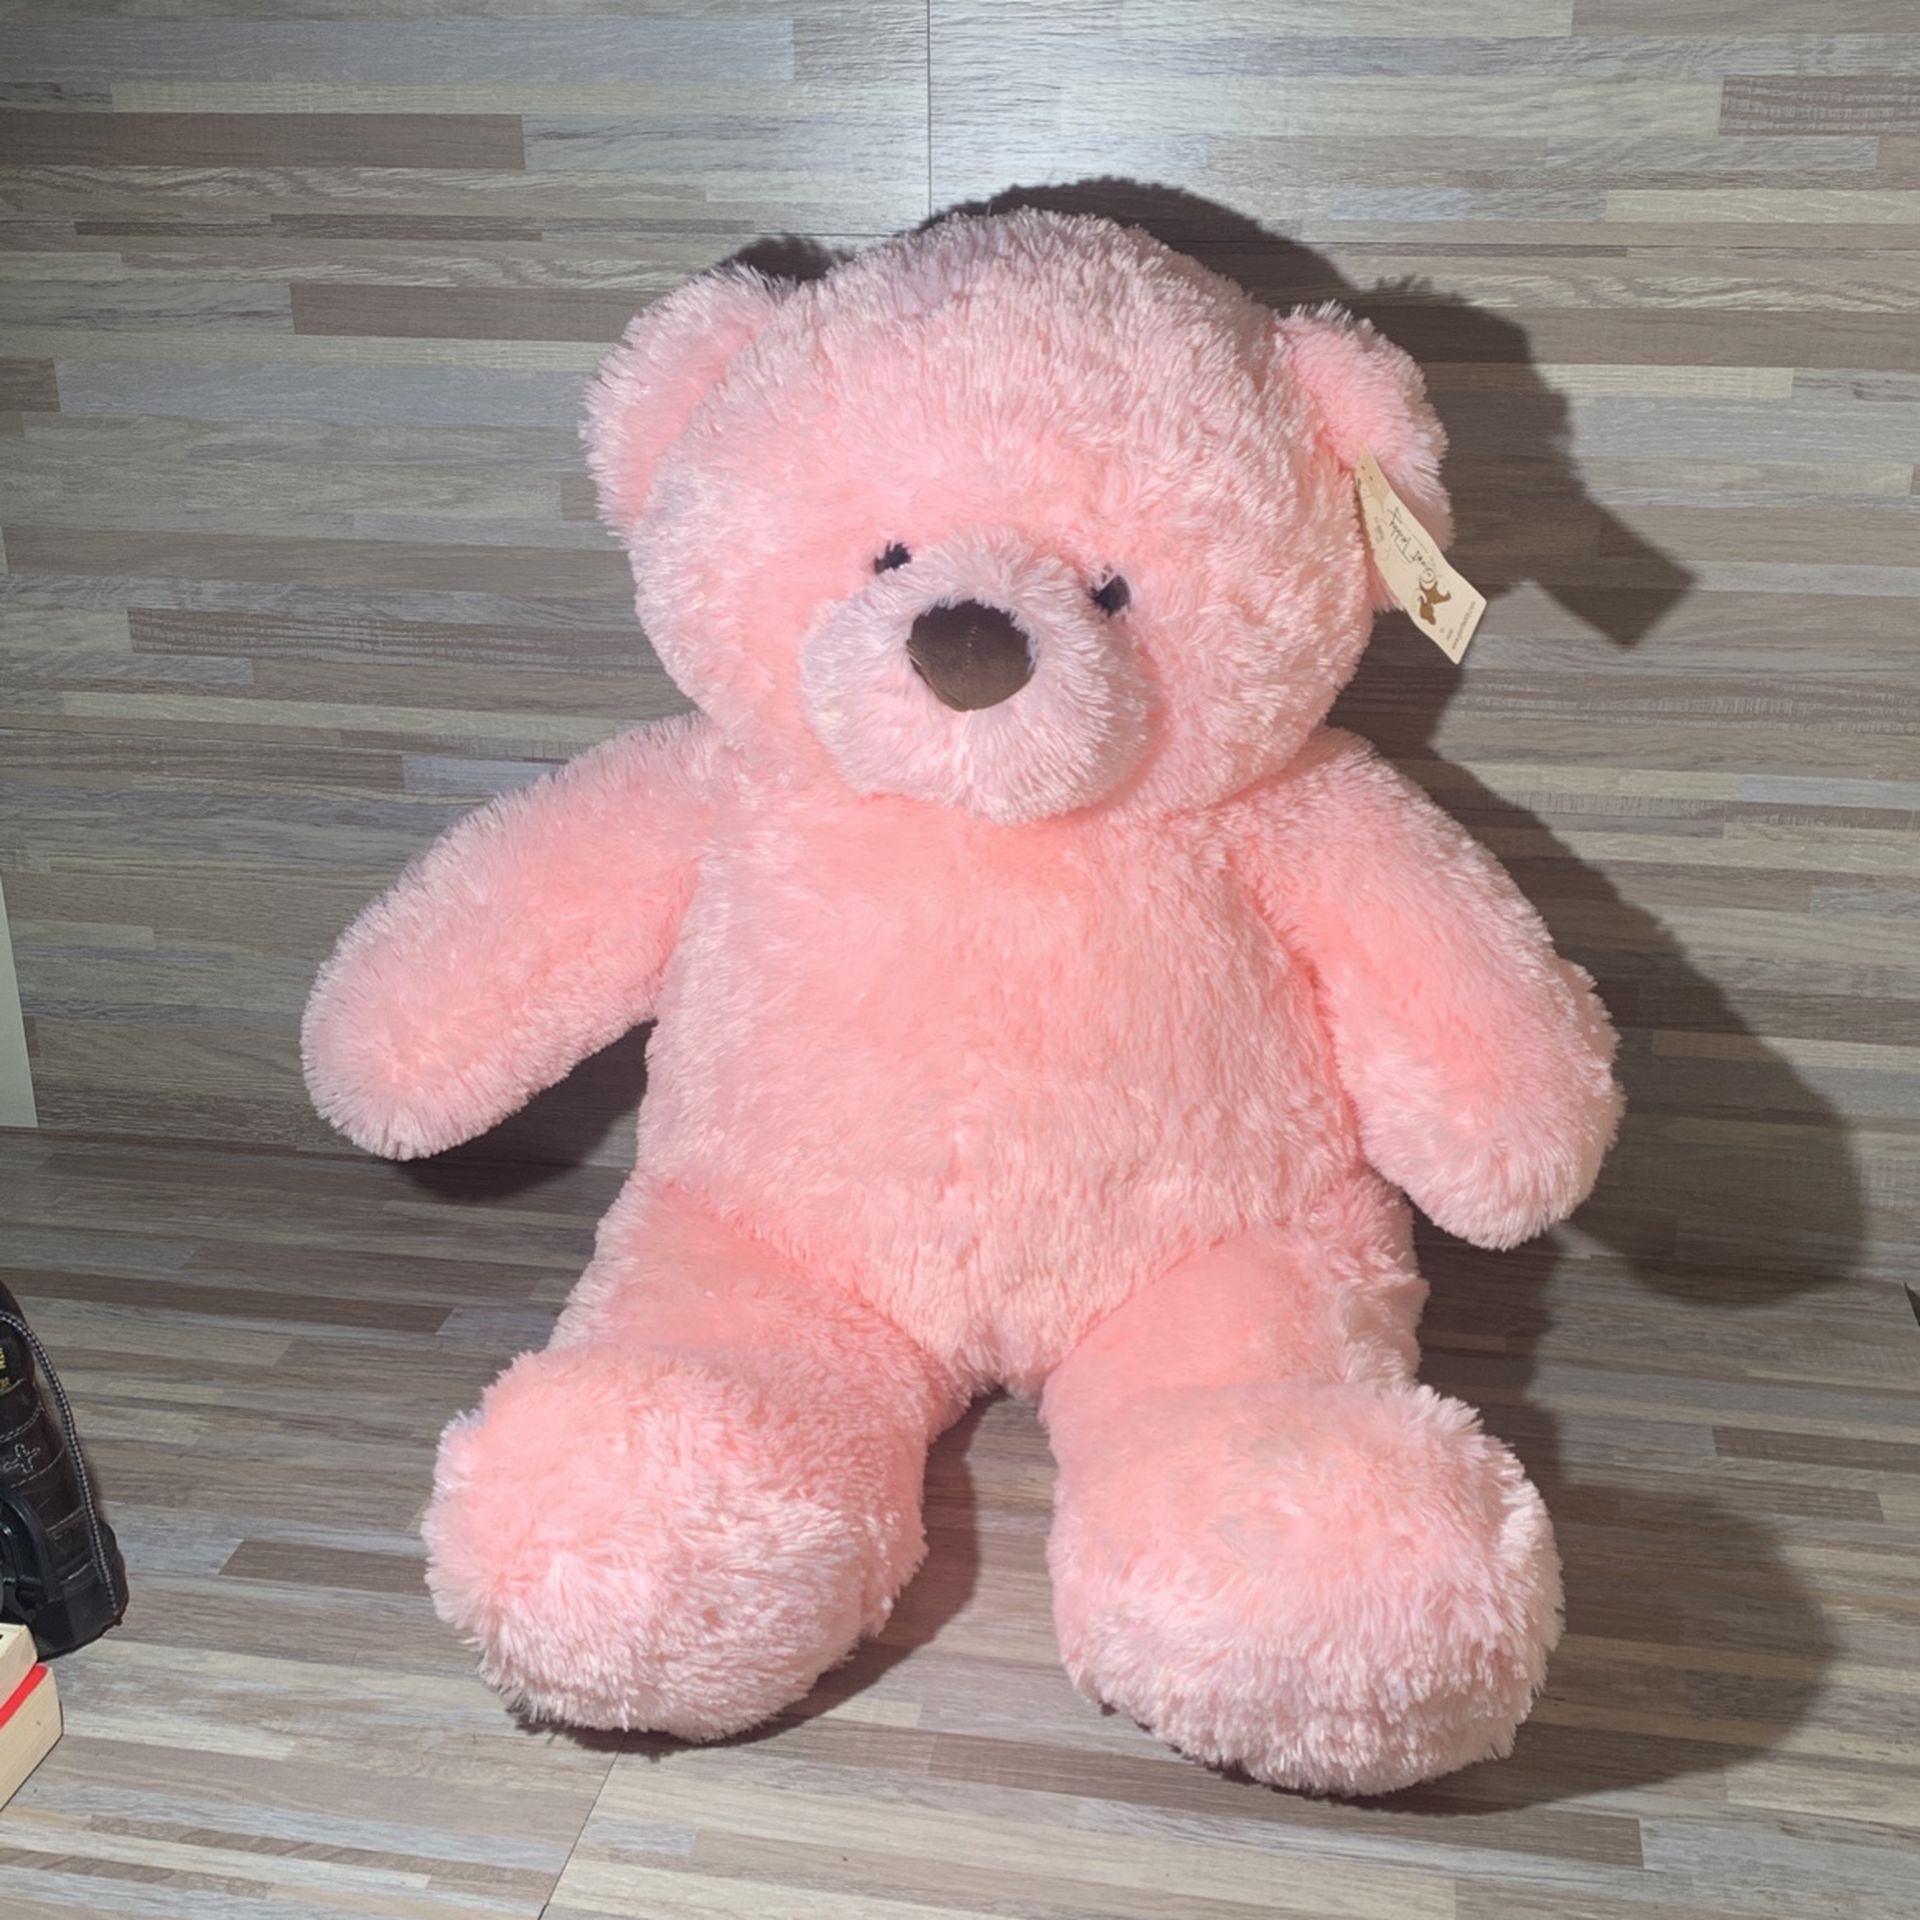 Valentines Day Gift! Giant Teddy - 36” Tall with Tags